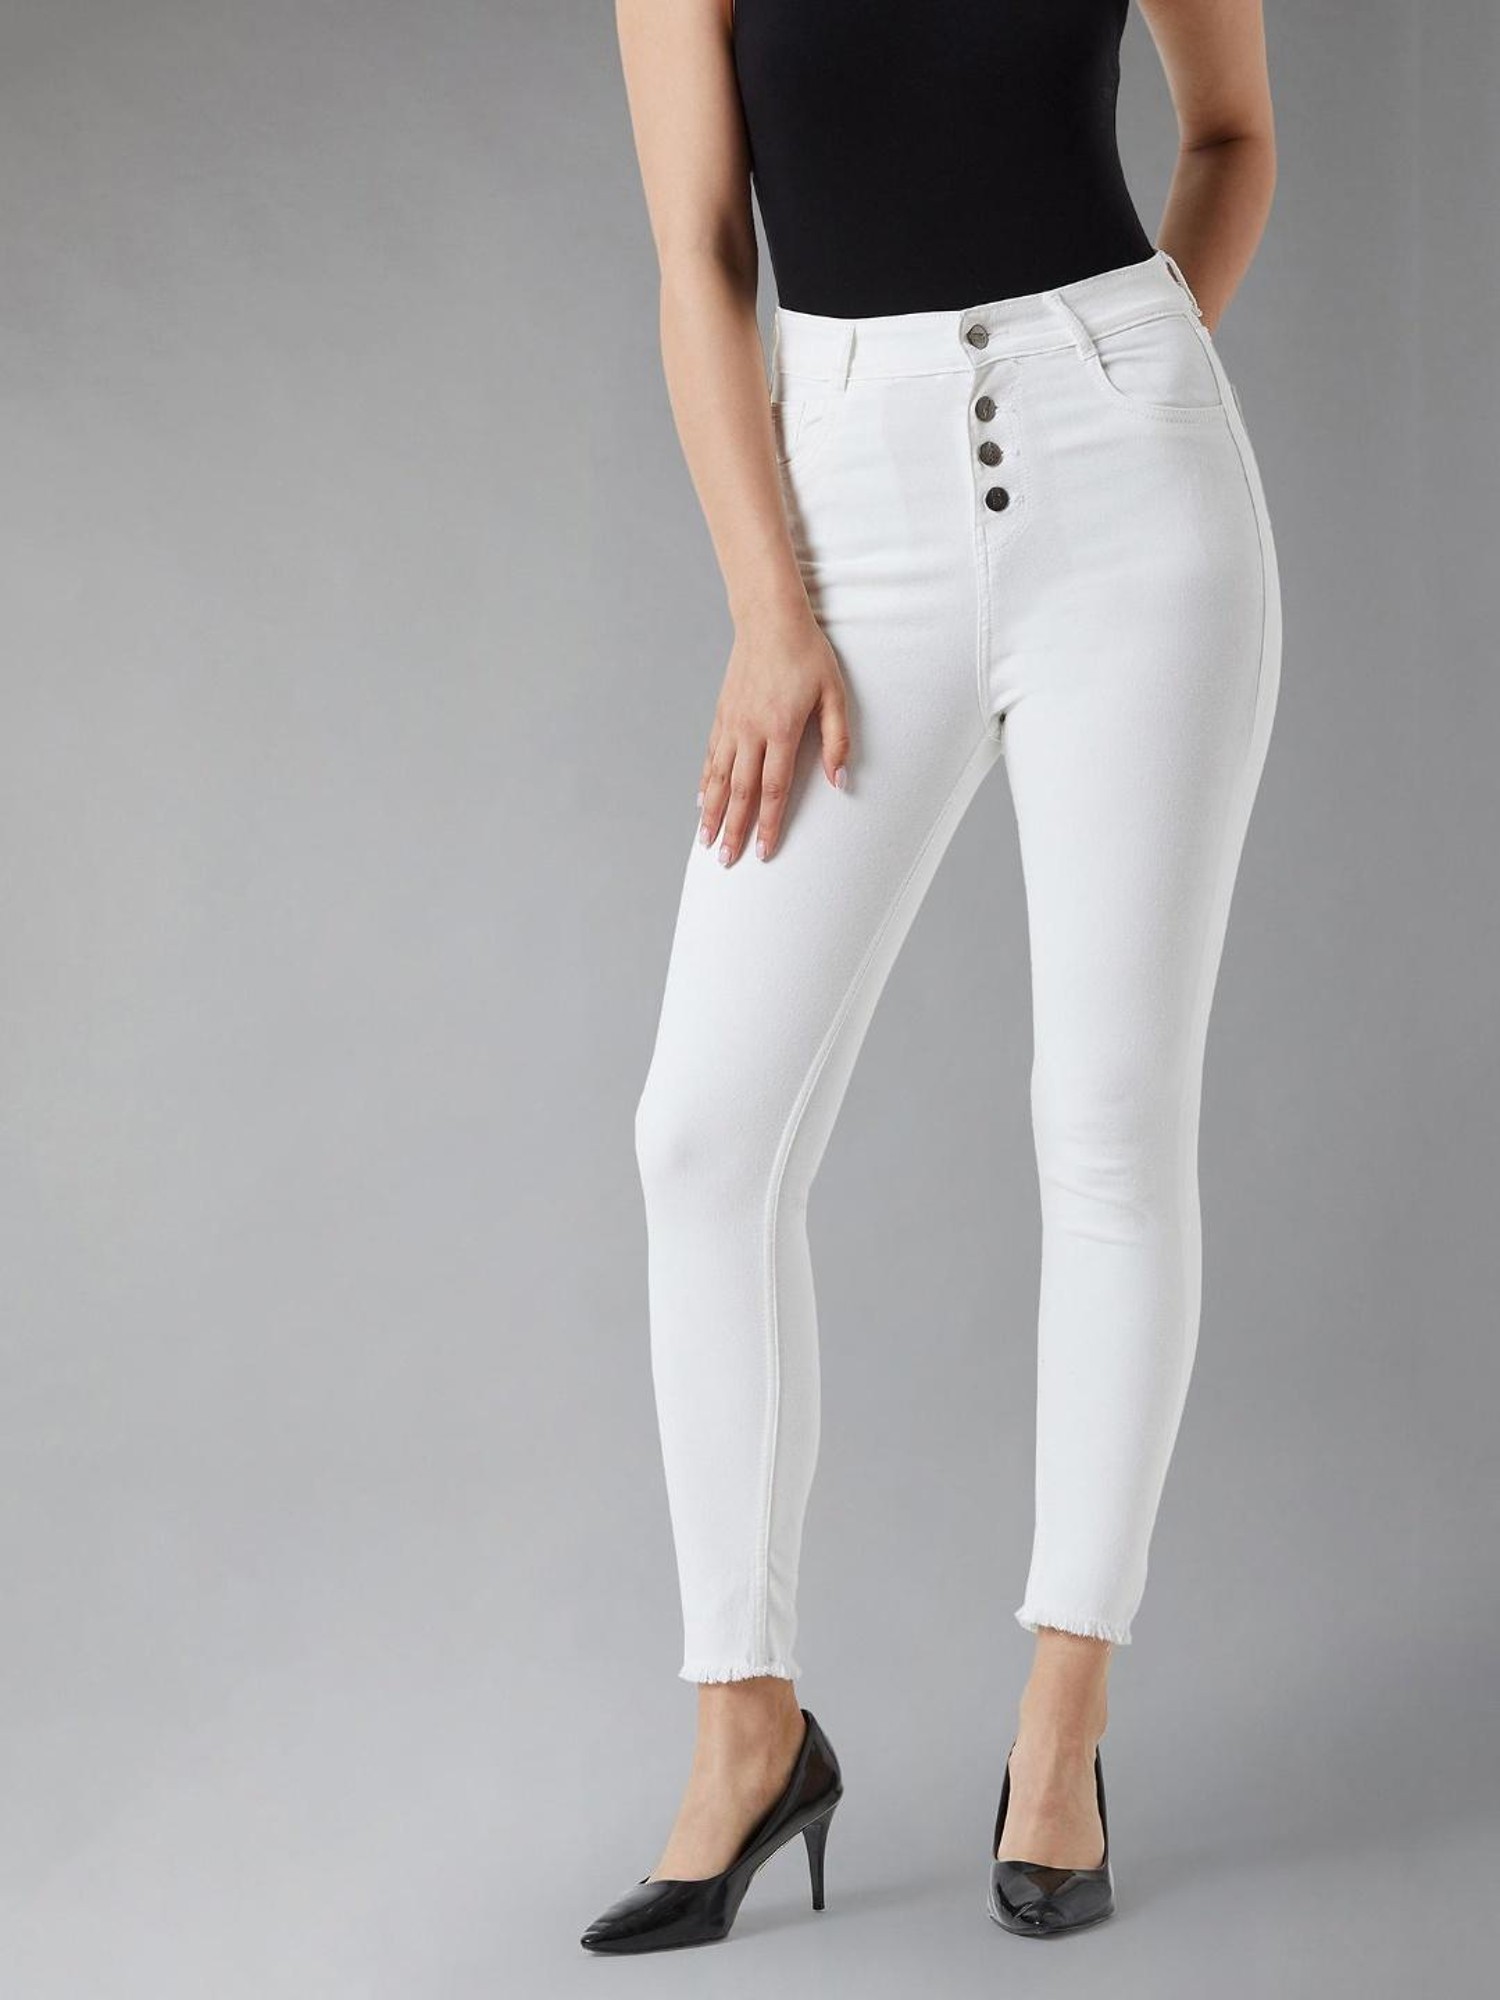 White Jeans for Women | Buckle